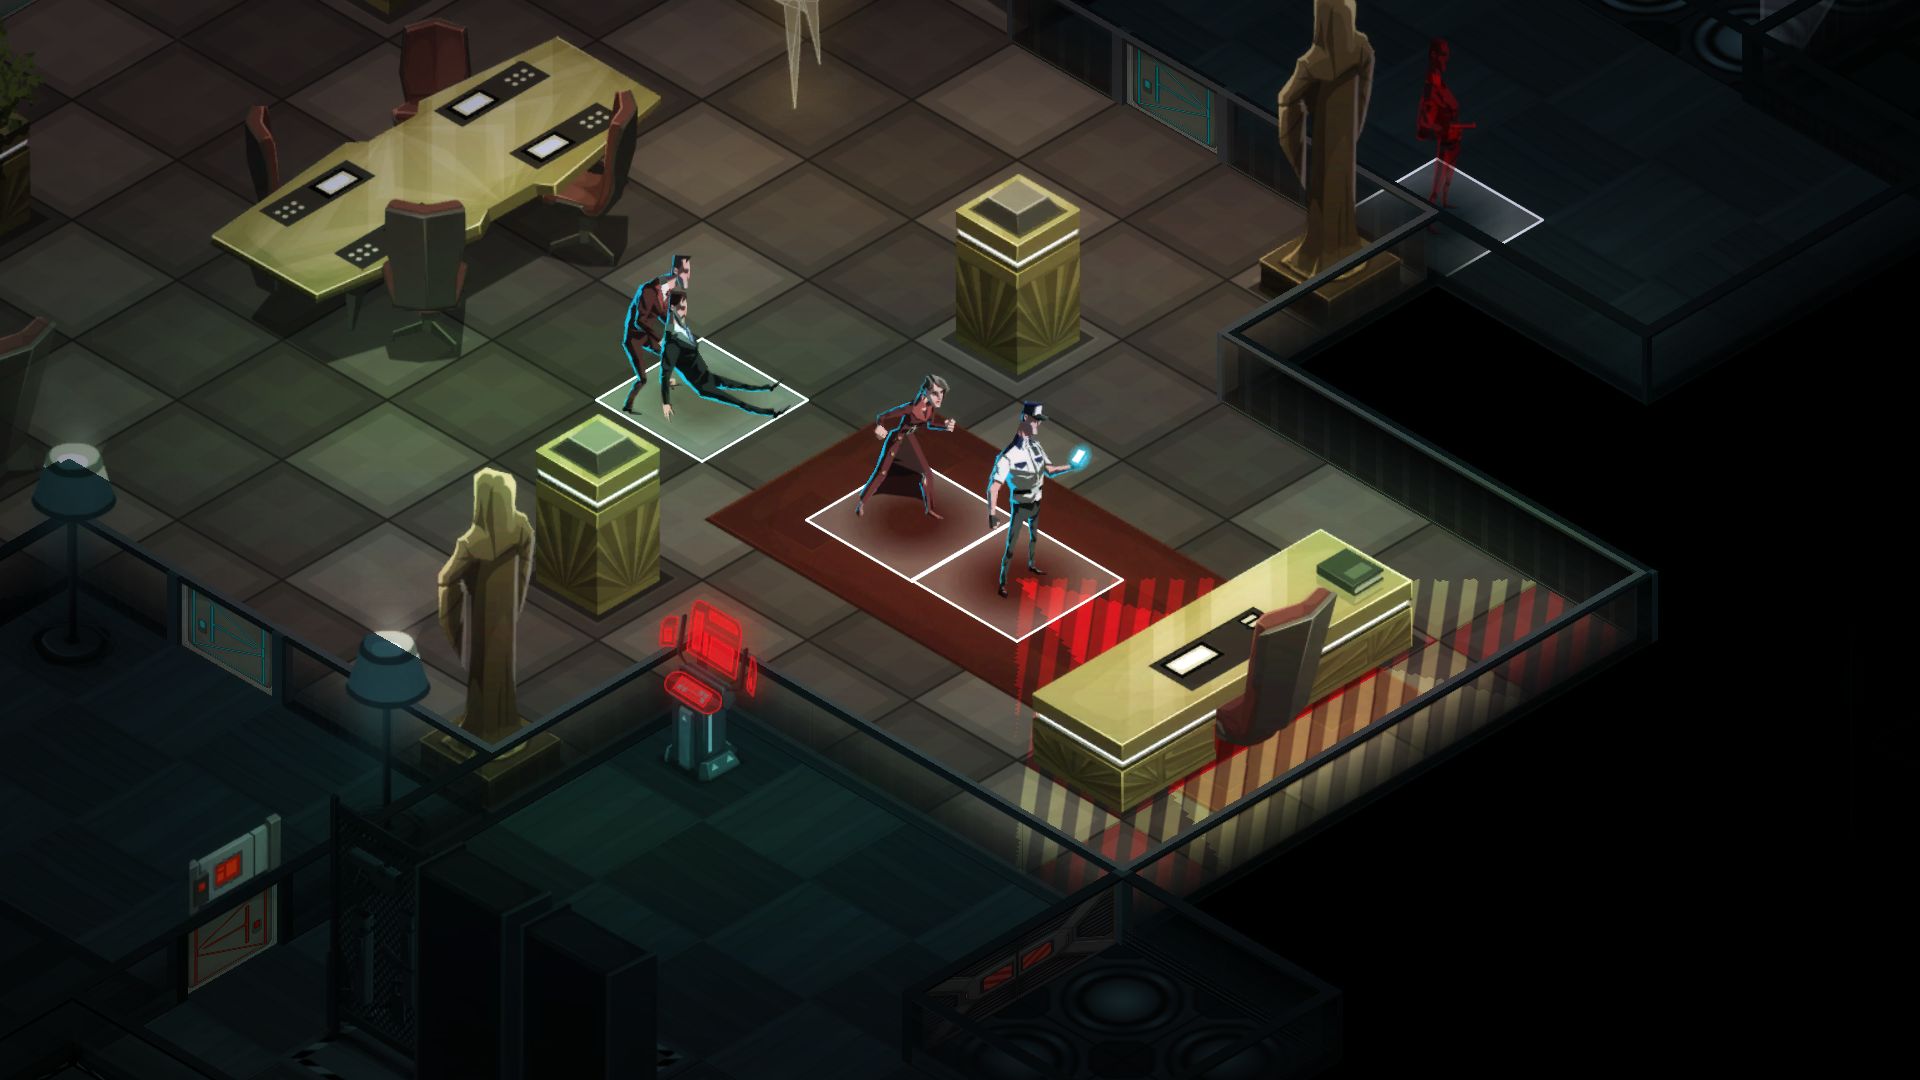 free download invisible inc switch